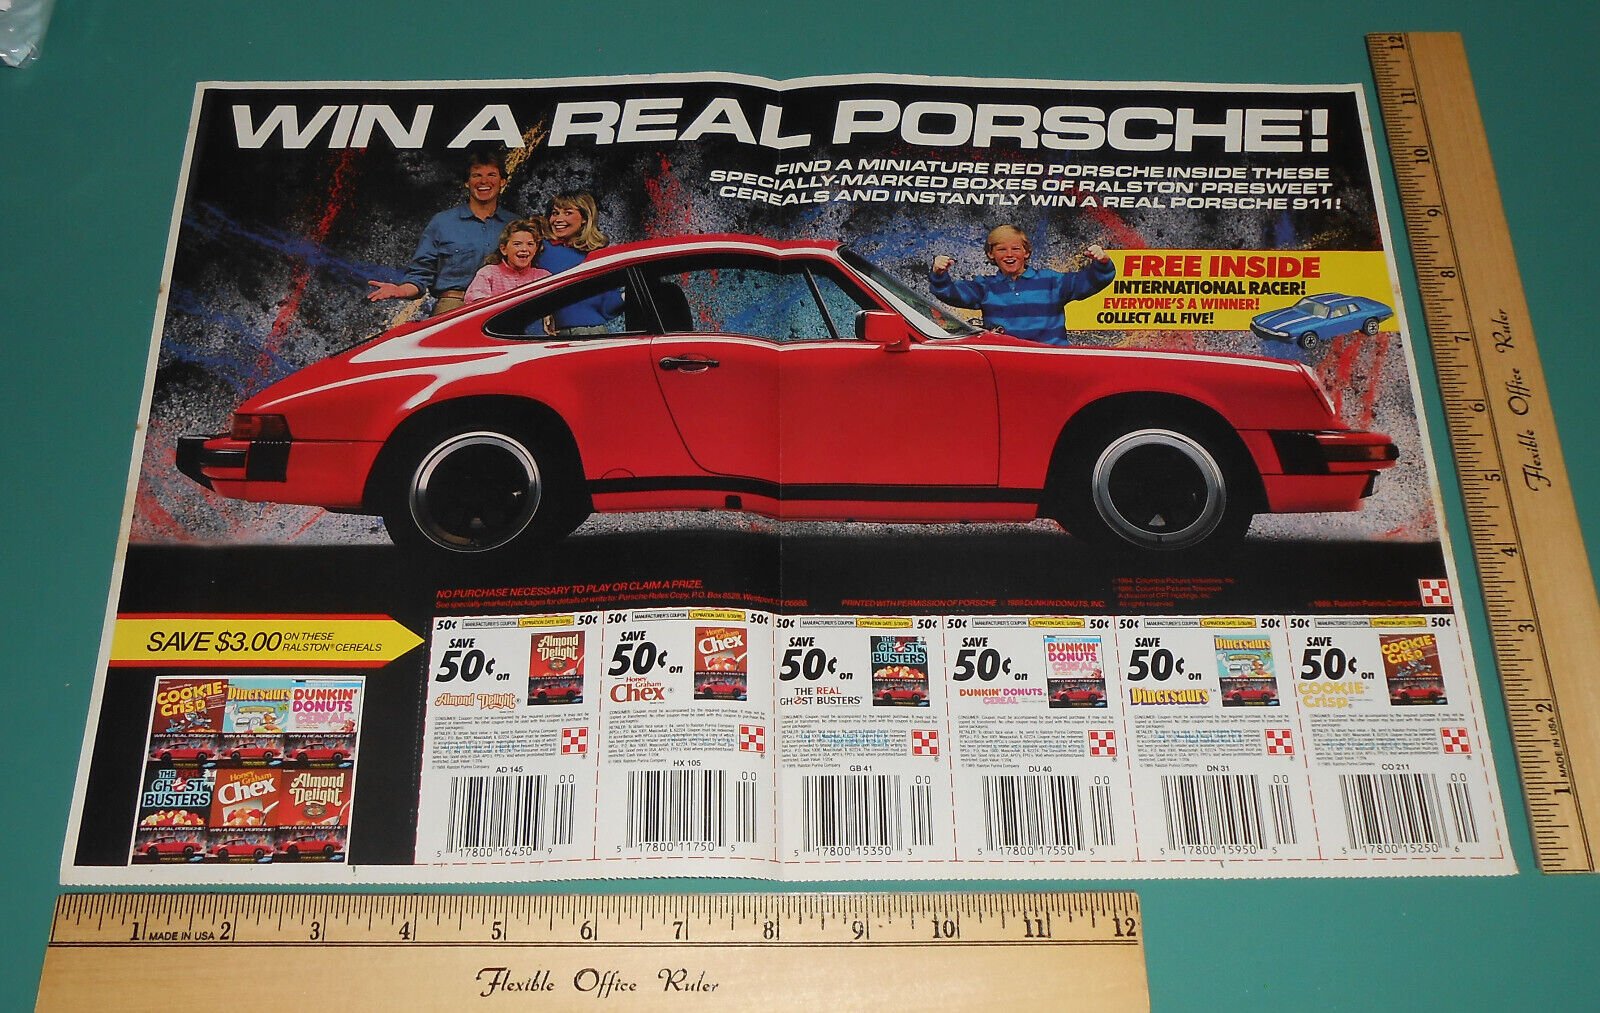 Vtg 1989 Win A Porsche 911 Ghostbusters Cereal Coupon Circular Print Ad Dinersau